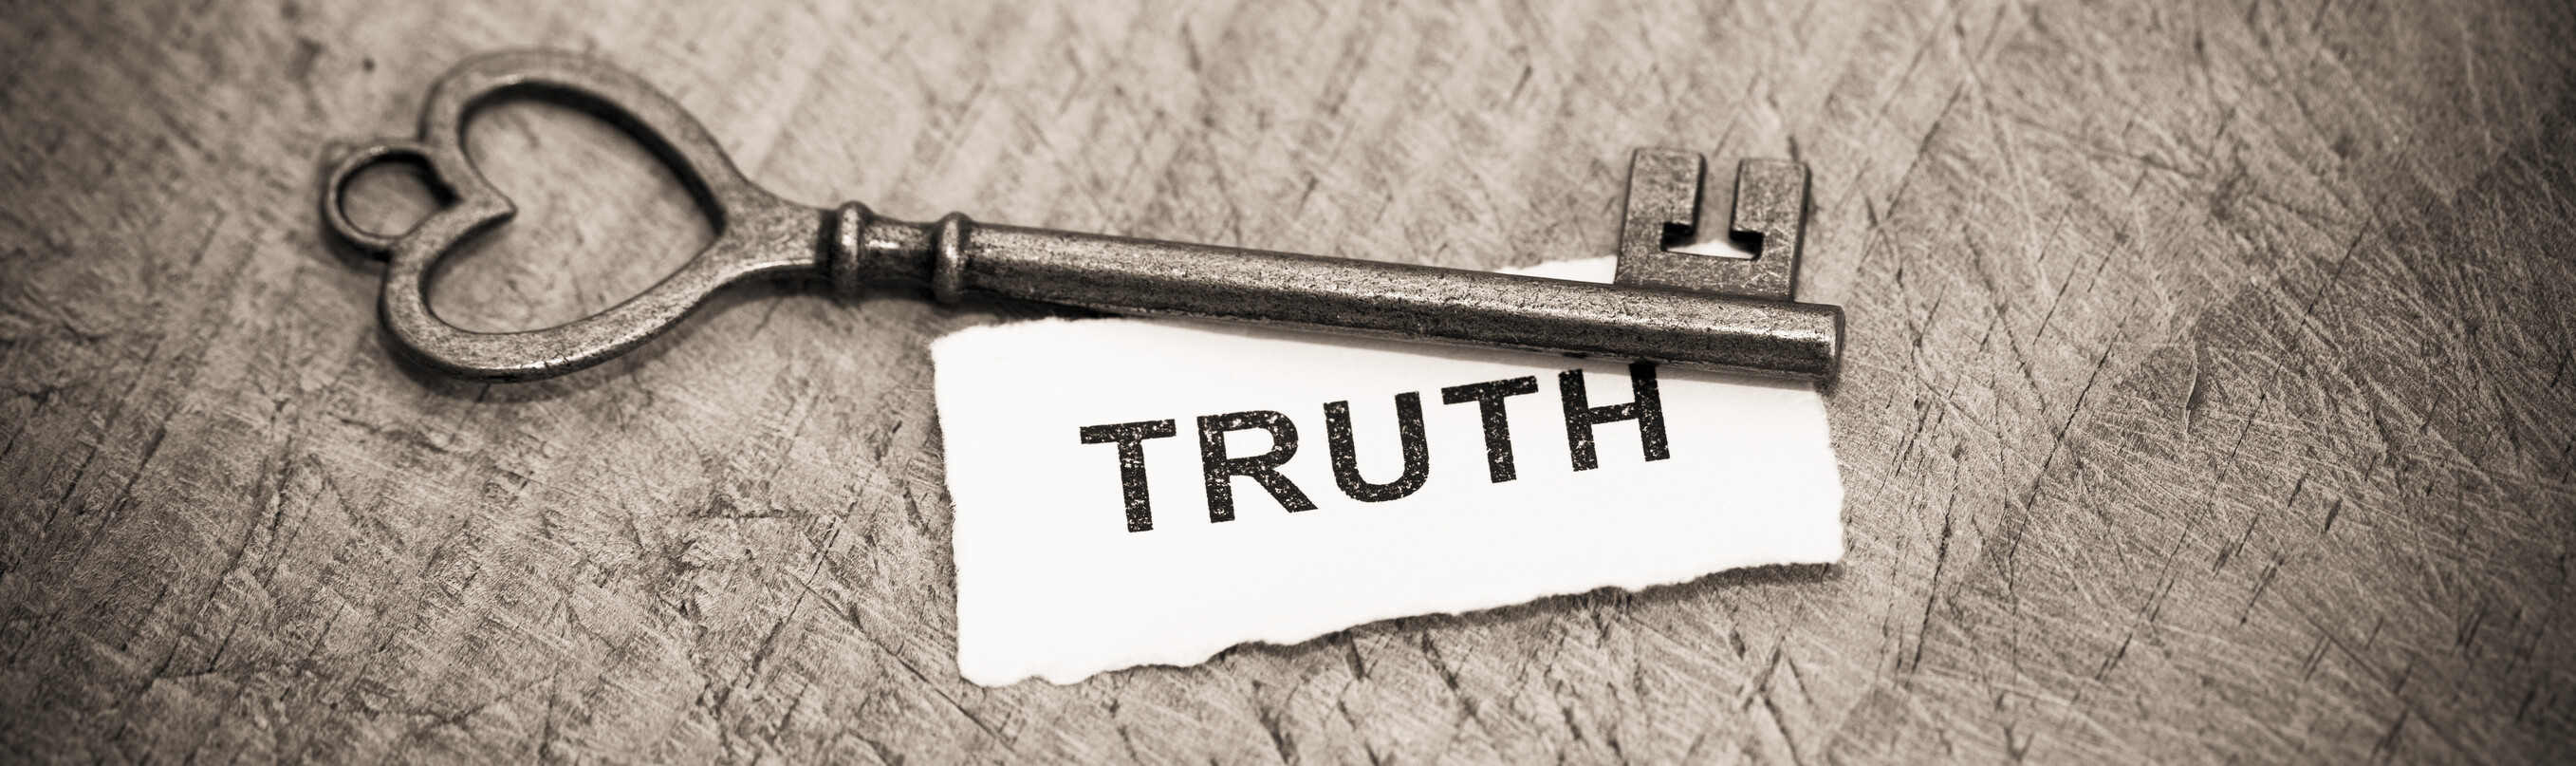 TOPIC: Implications of Truth Deniers Taking Power – The Christian Worldview